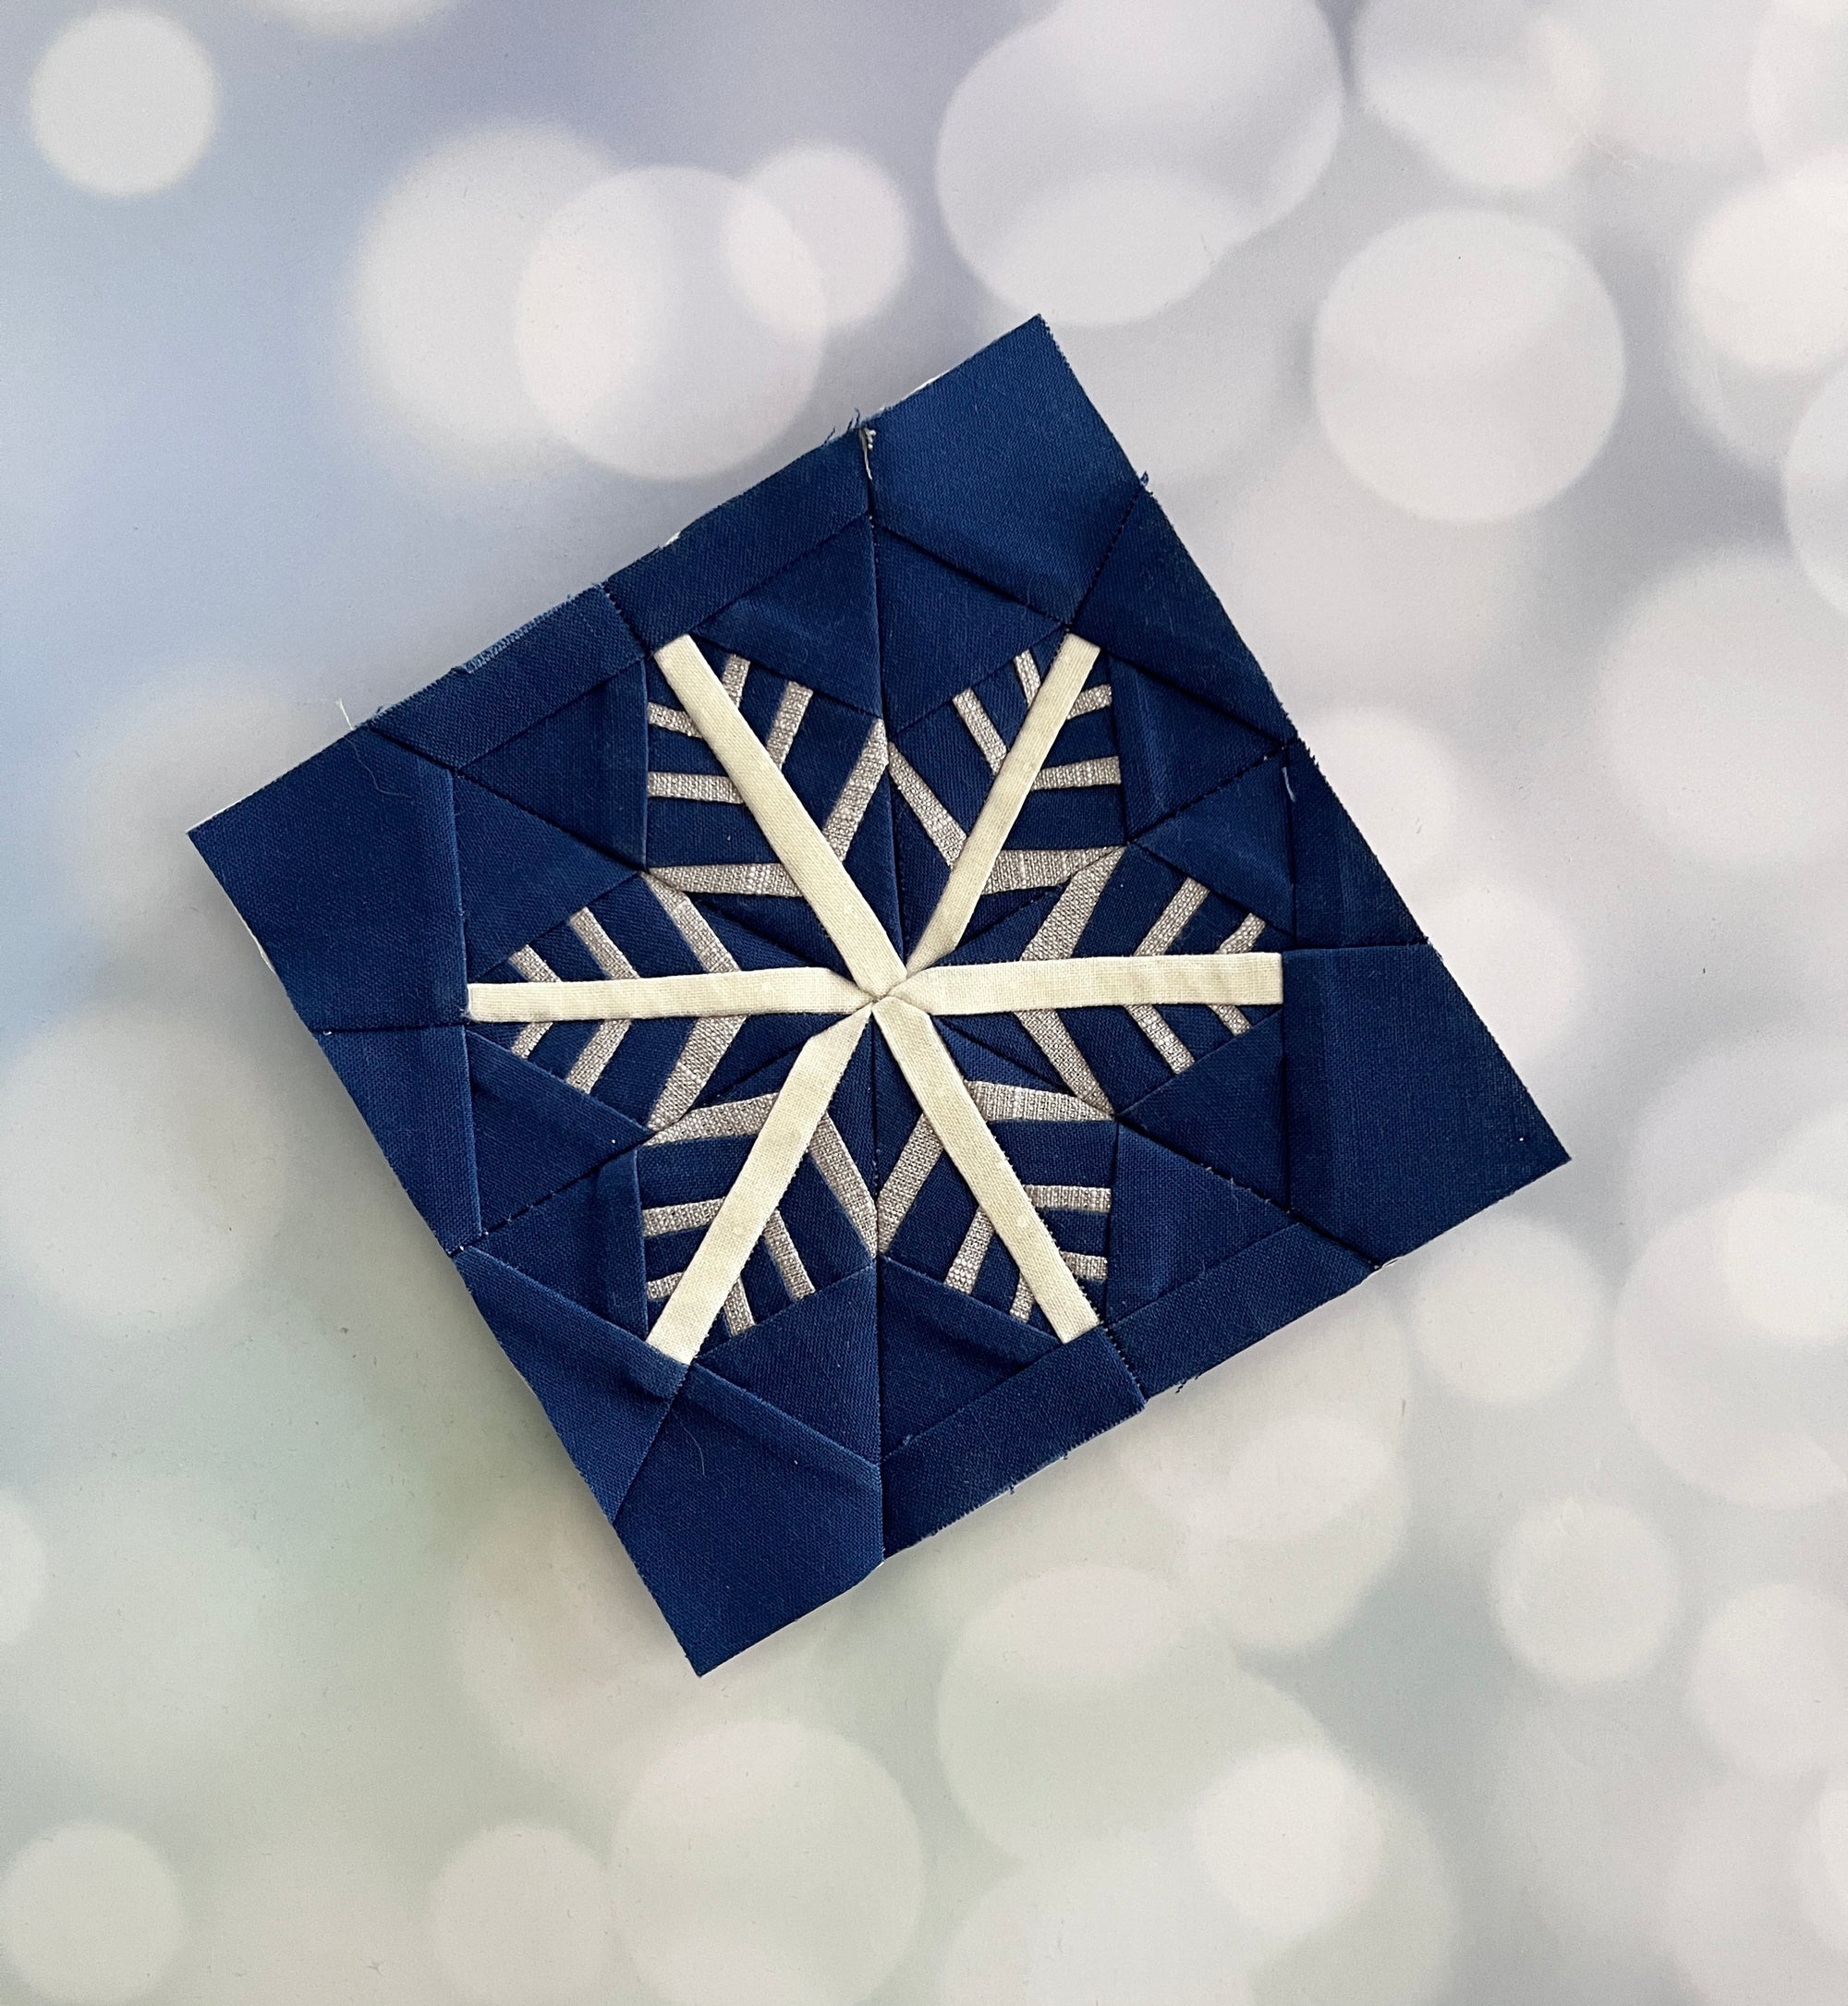 snowflake paper pieced pattern sewn in fabric